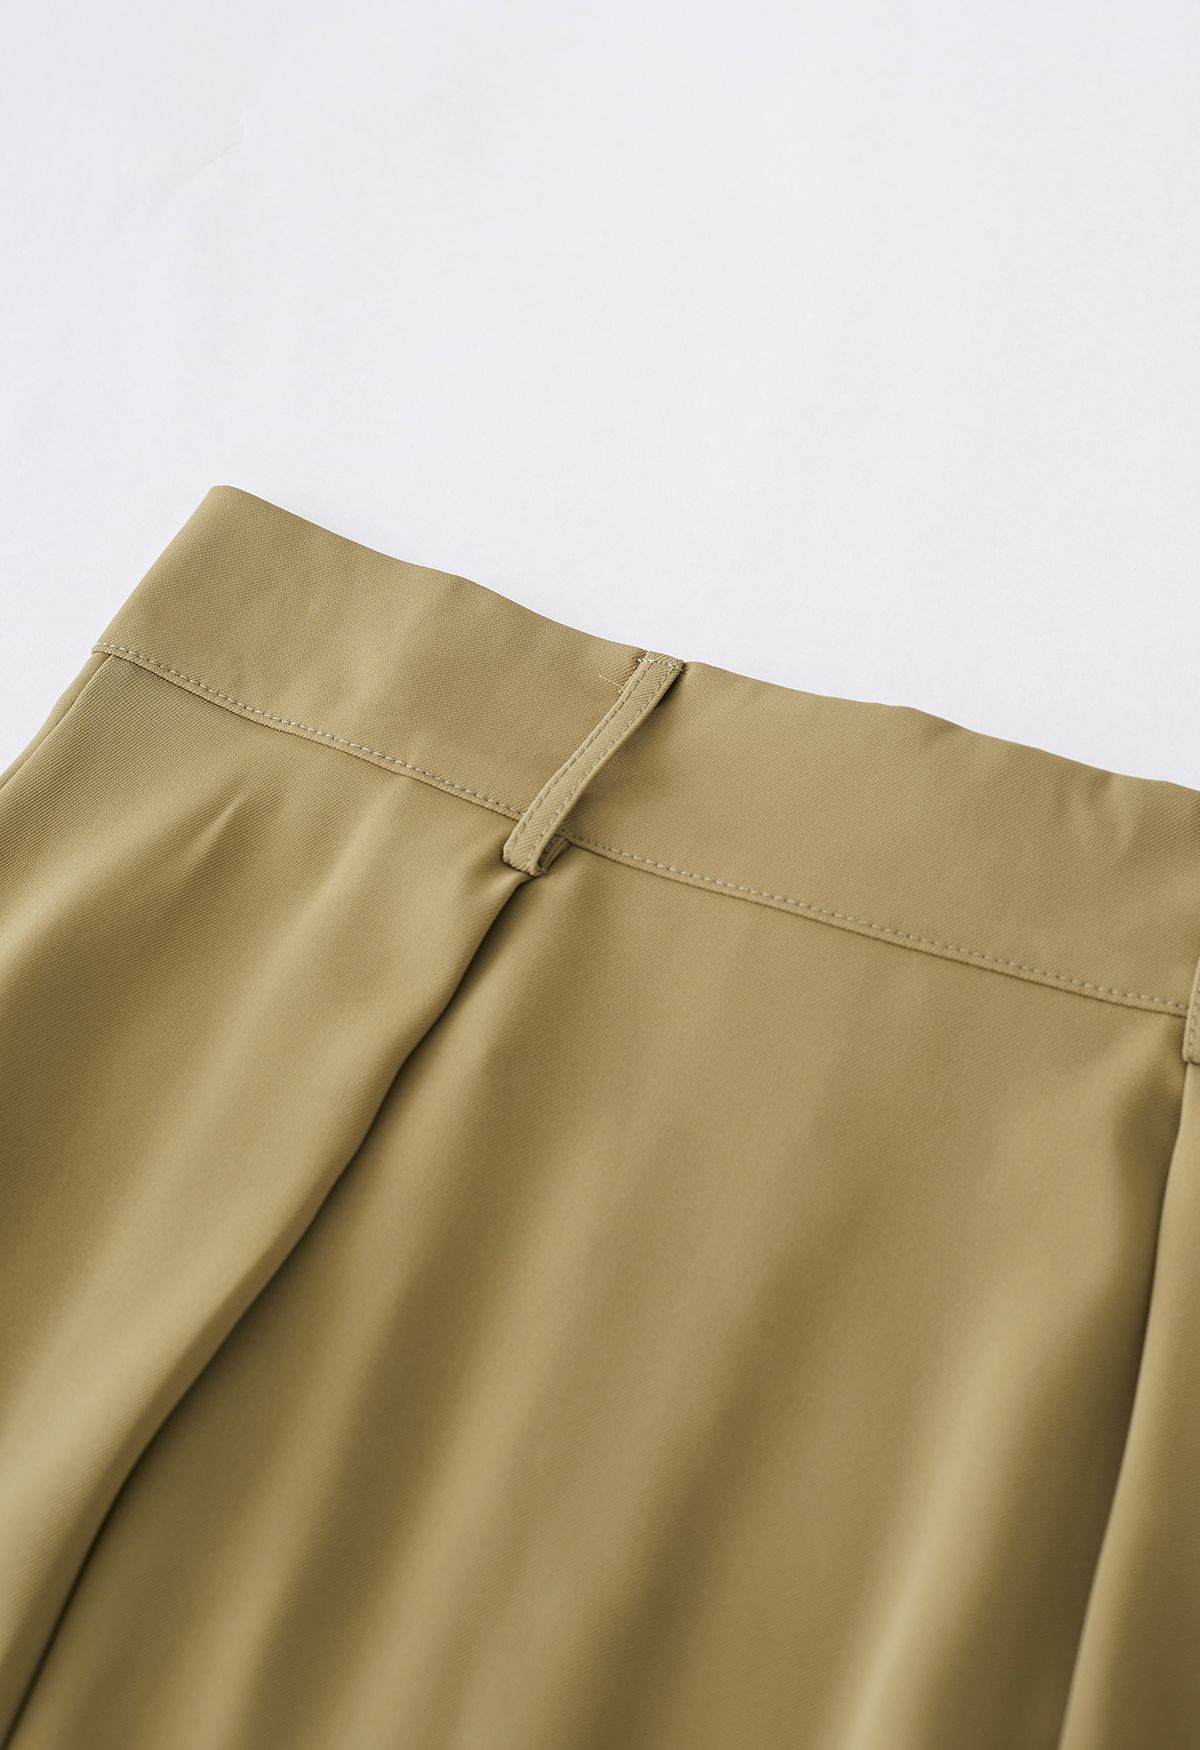 O-Ring Belt Pleated Flare Midi Skirt in Camel - Retro, Indie and Unique ...